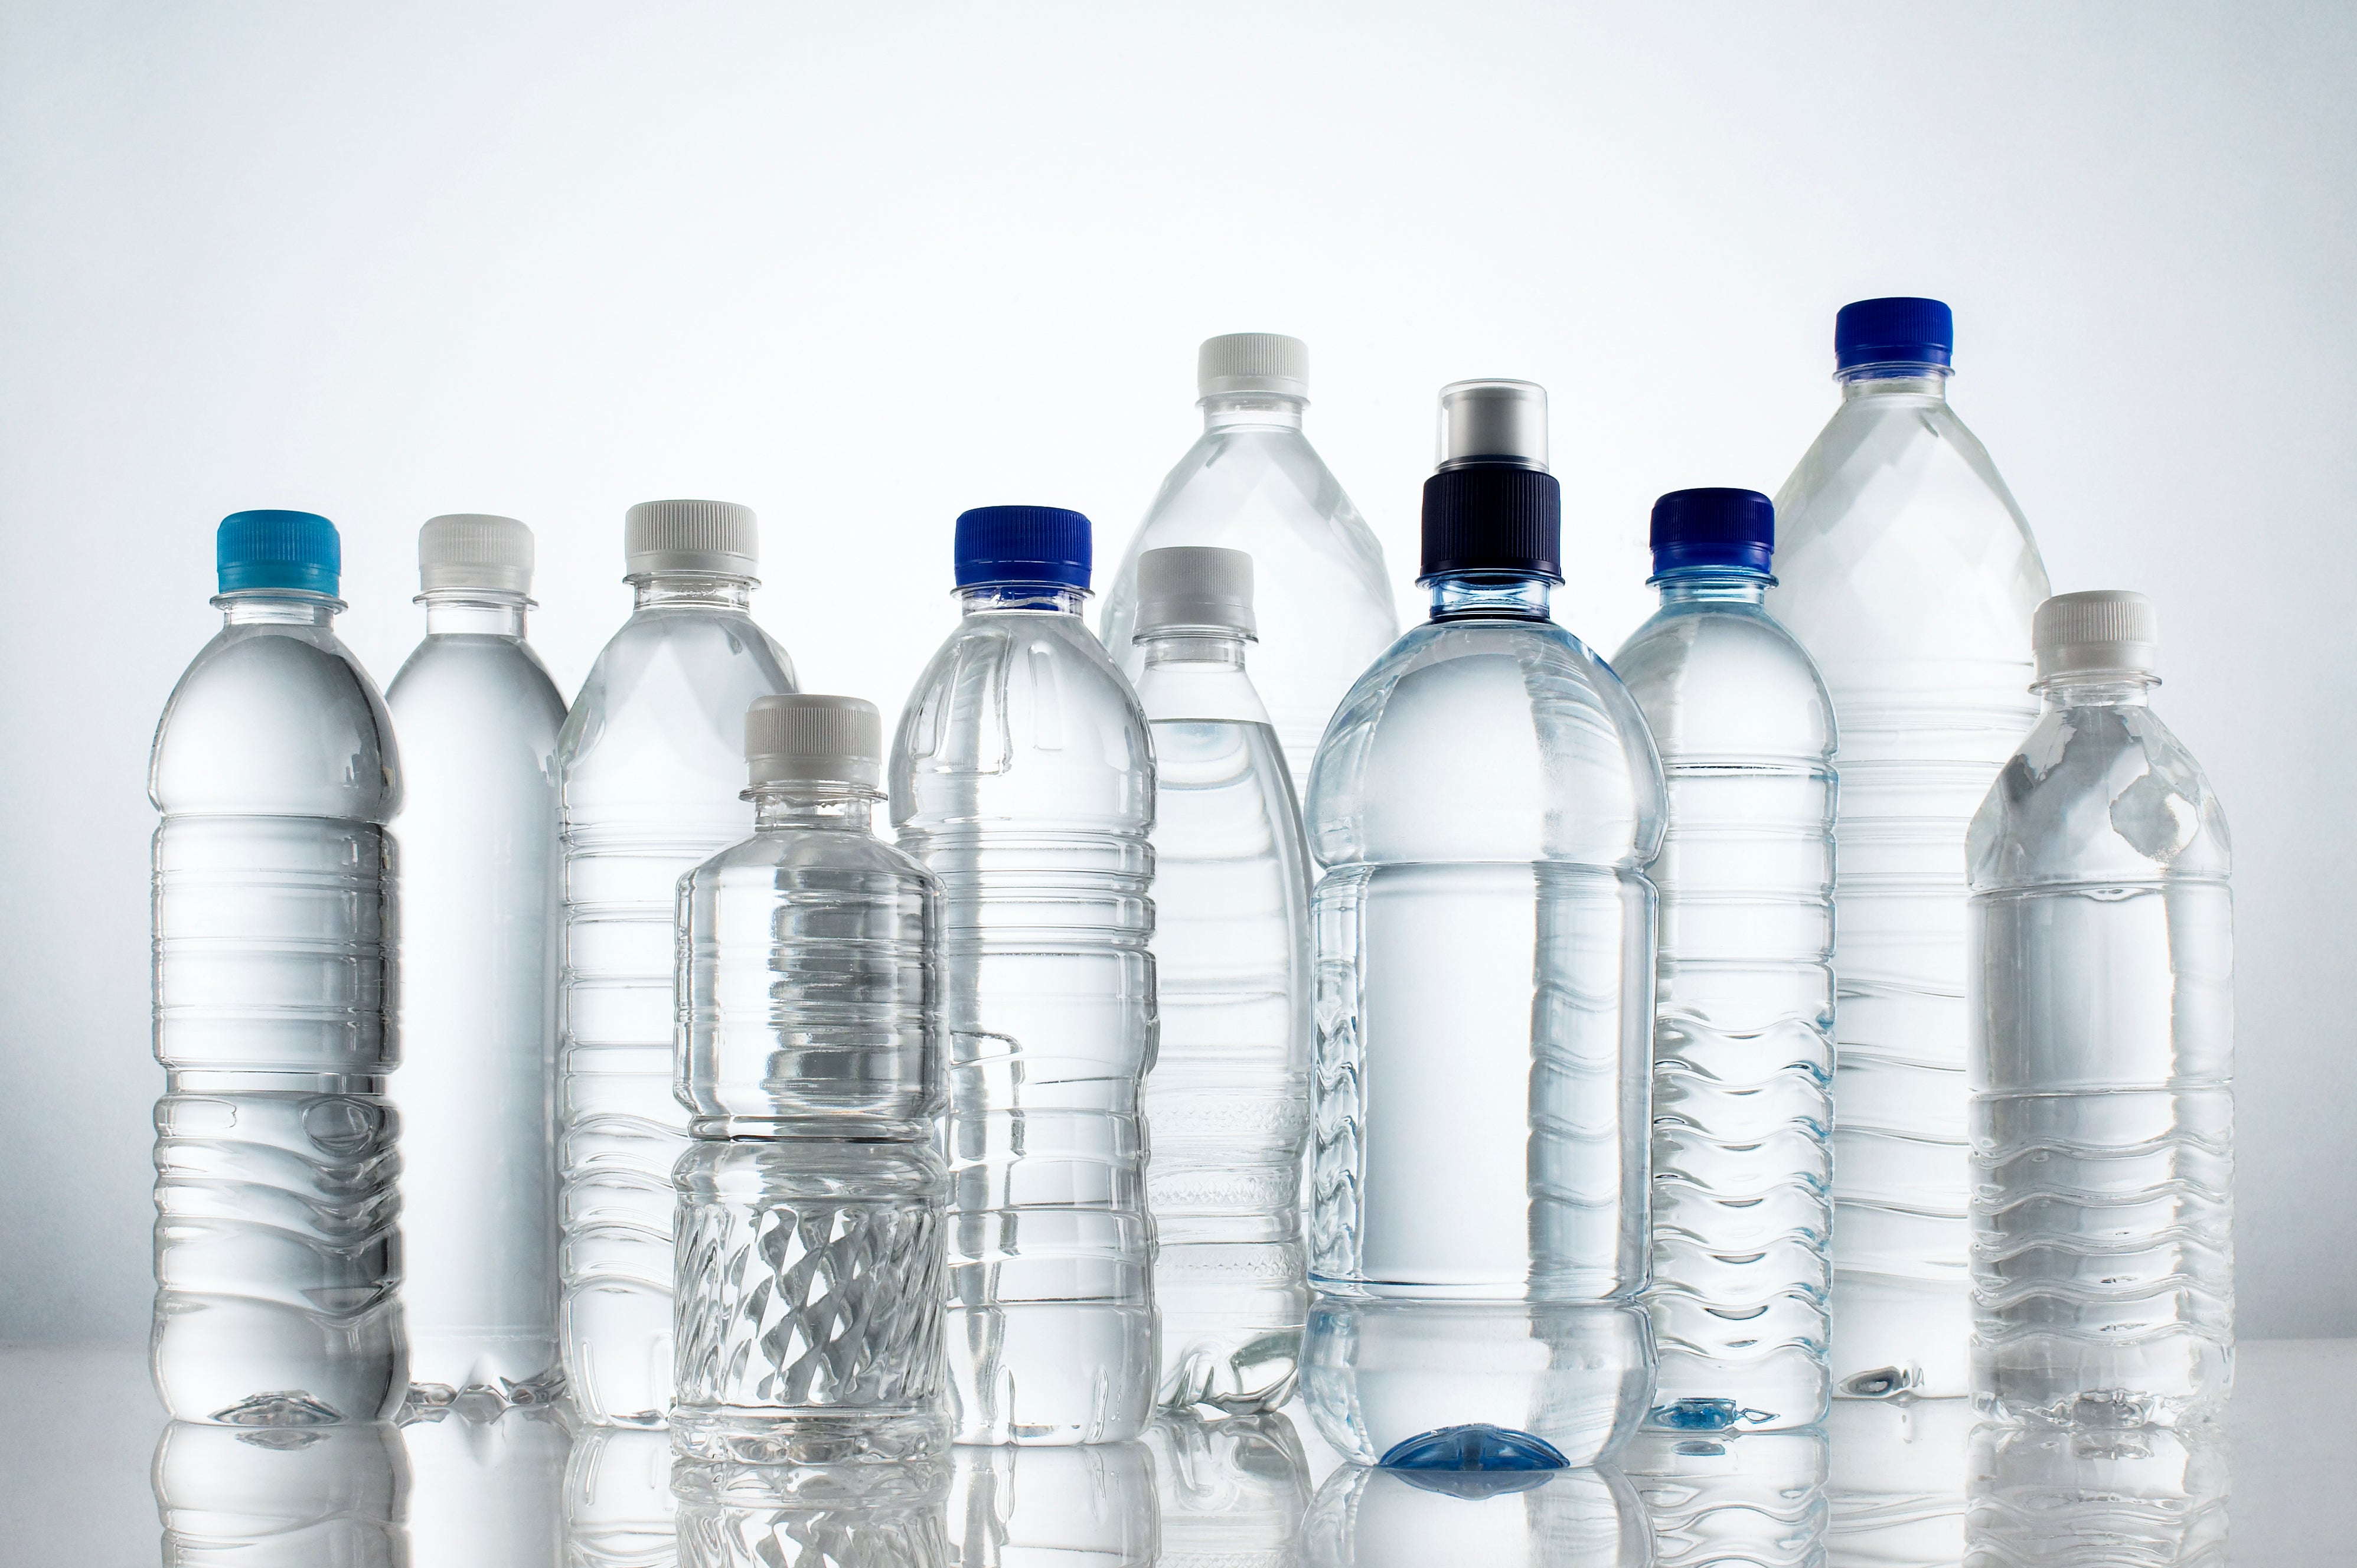 What is the difference between a BPA and a non-BPA water bottle? - Quora